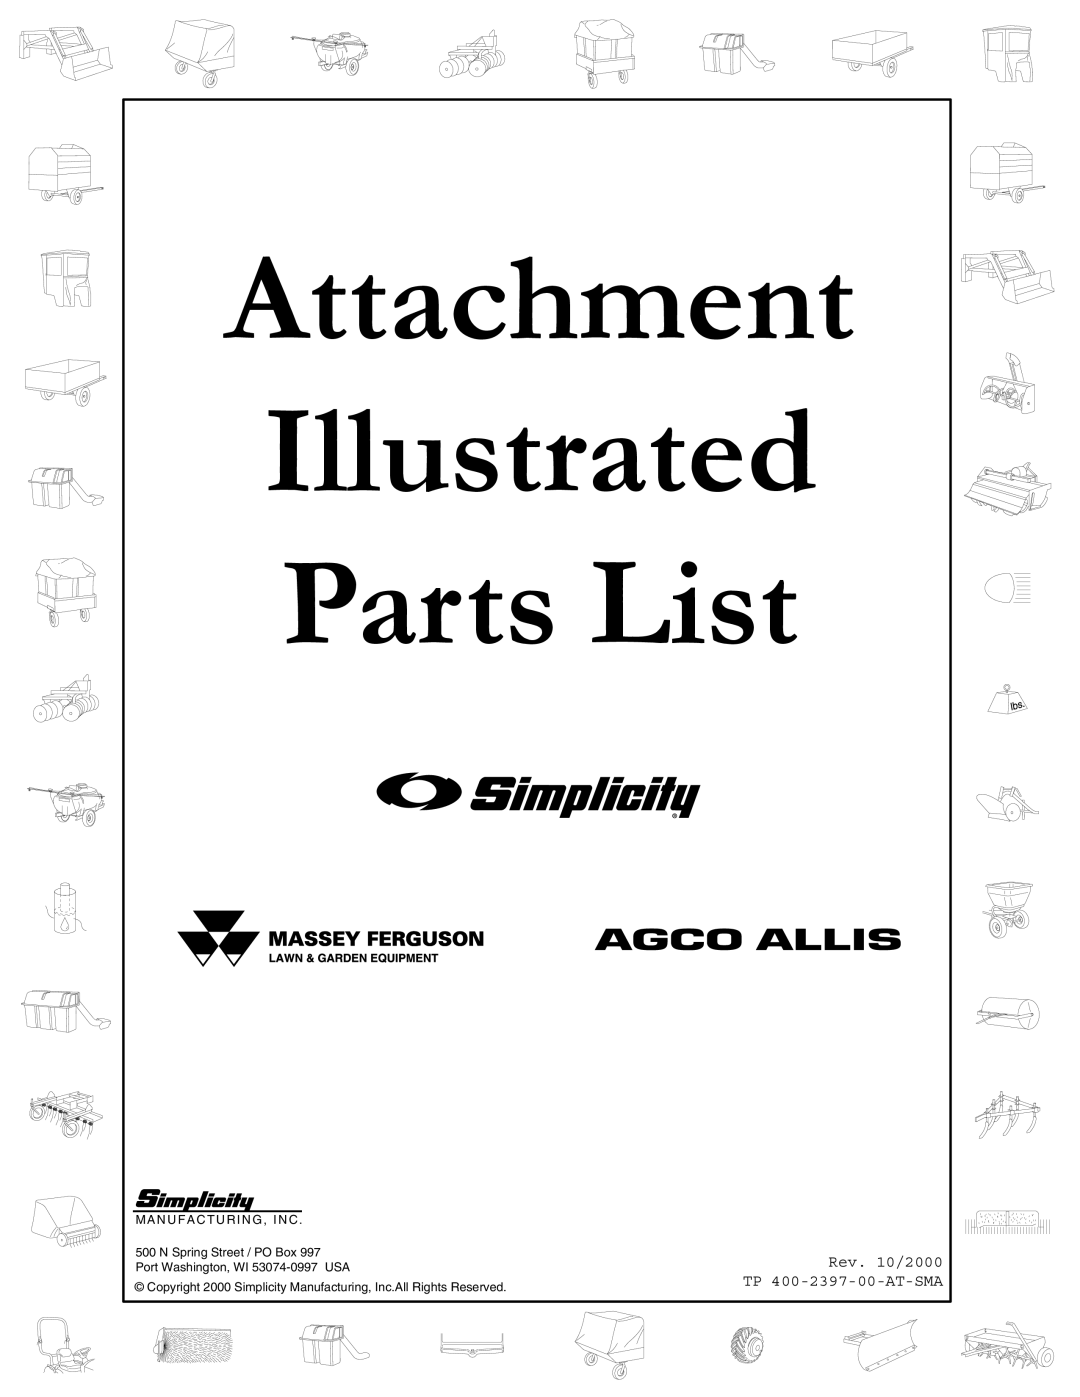 Simplicity manual Rev. 10/2000 TP 400-2397-00-AT-SMA, Attachment Illustrated Parts List, N Spring Street / PO Box 